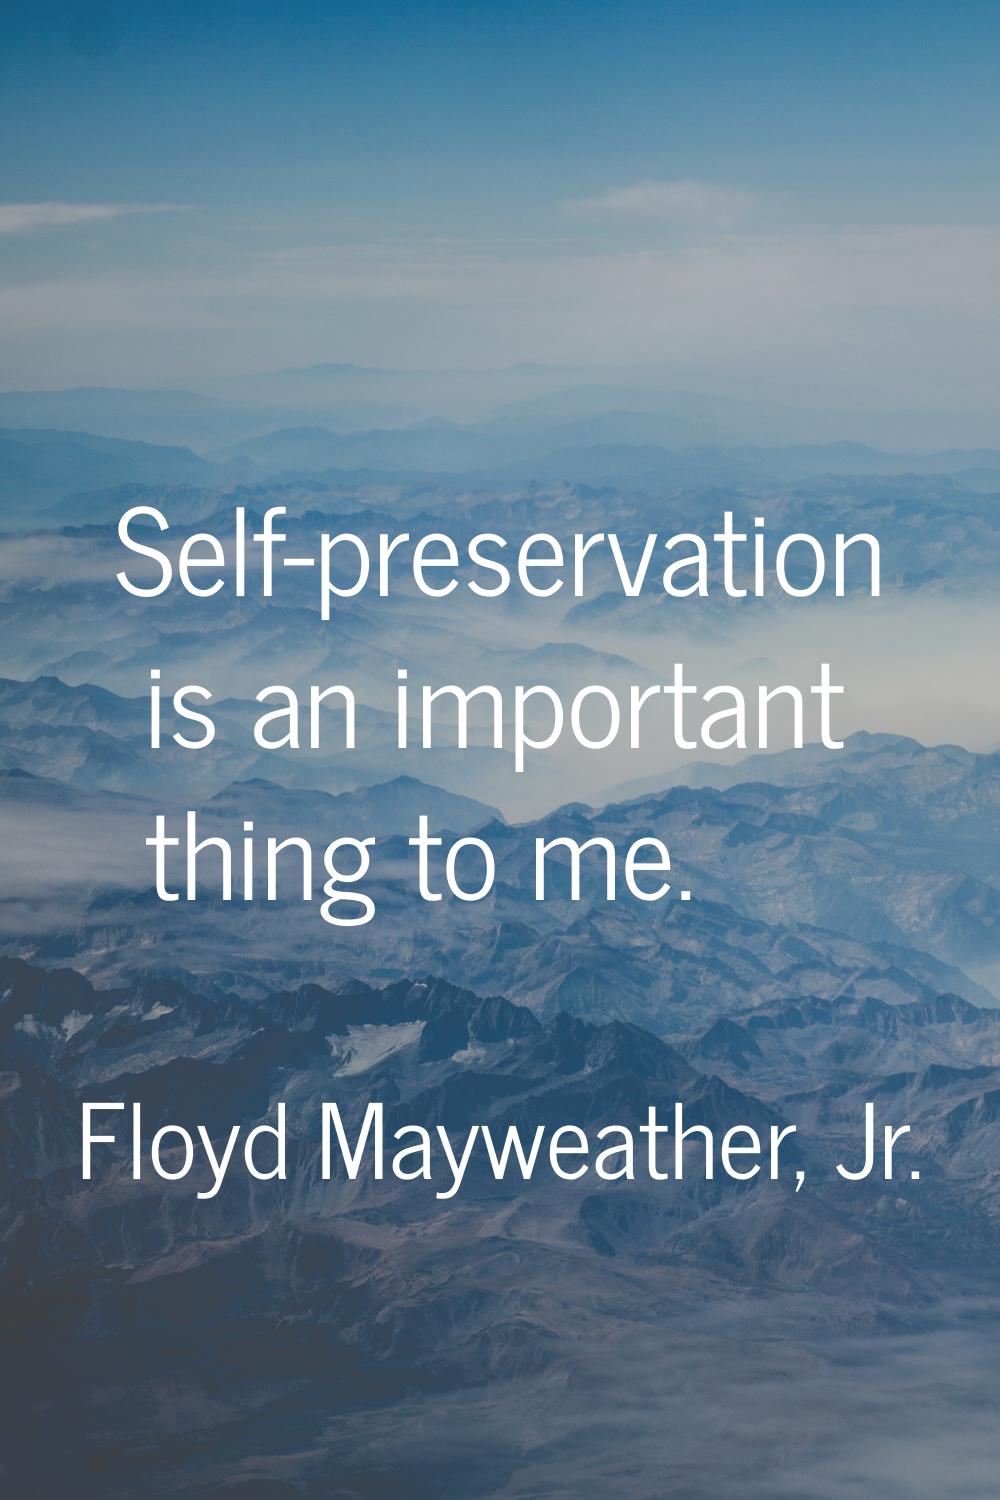 Self-preservation is an important thing to me.